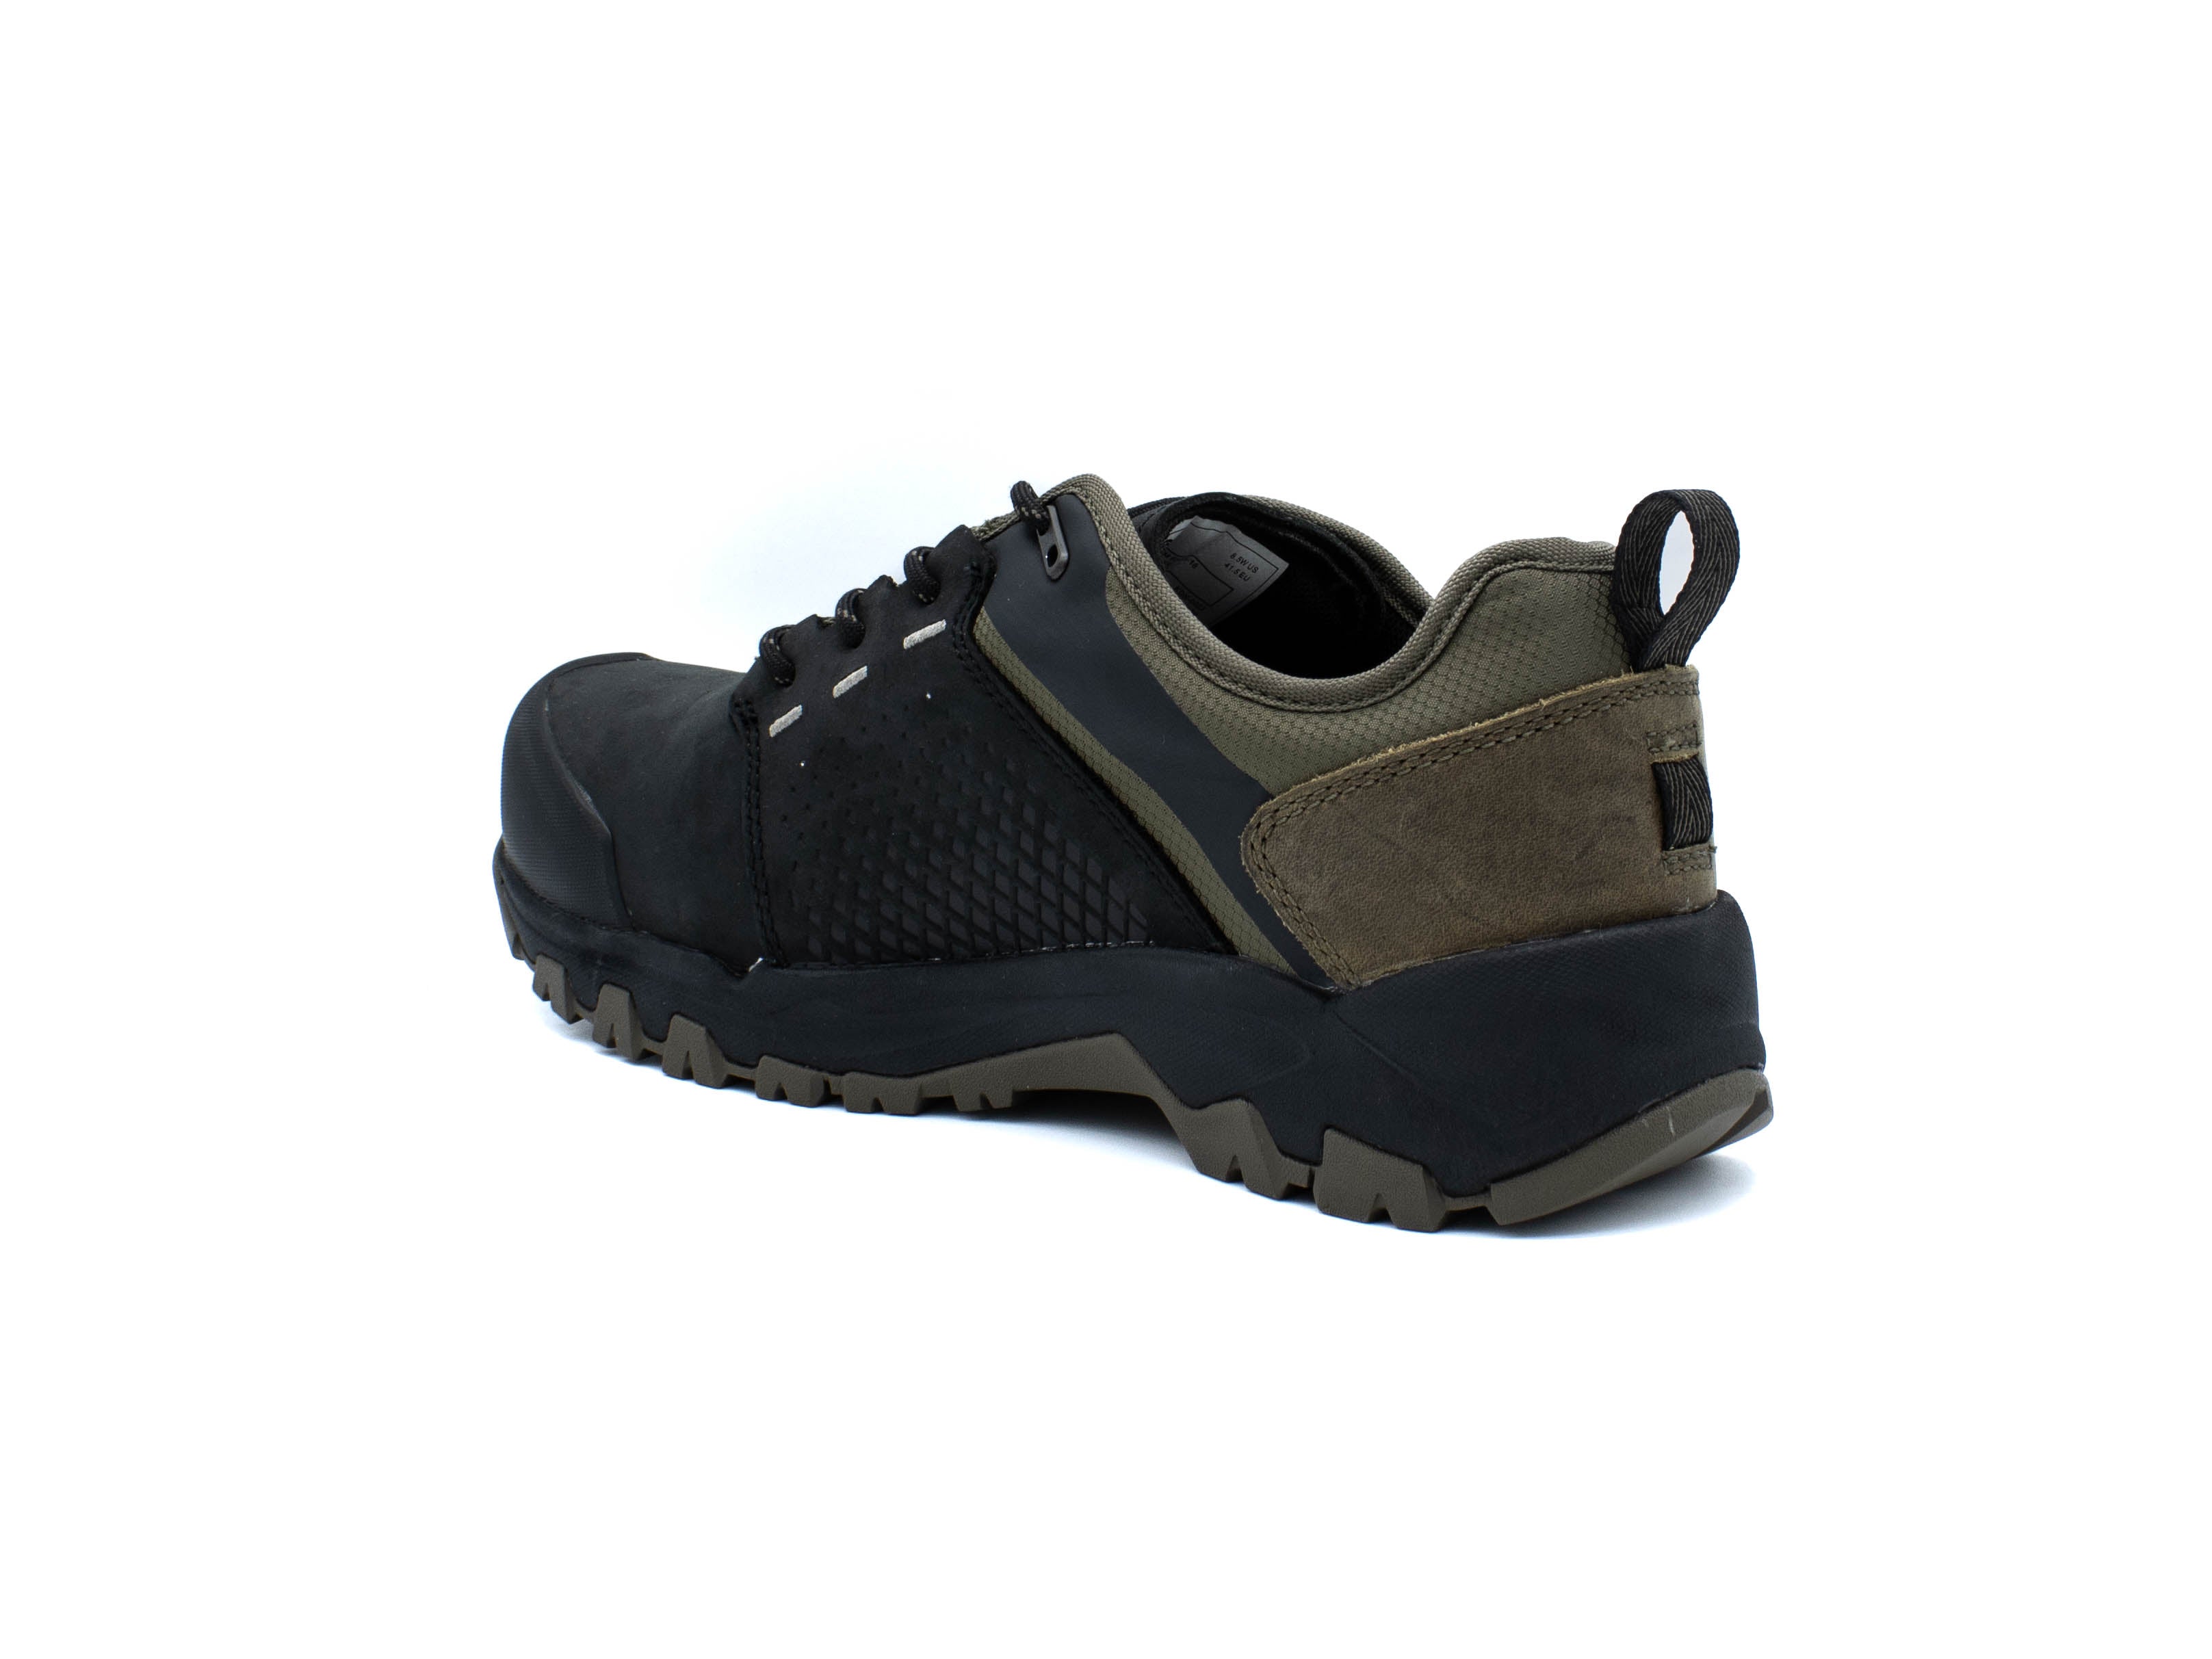 KODIAK SAFETY Composite Composite Toe and Plate Kodiak Quest Bound Low Waterproof Work Boots